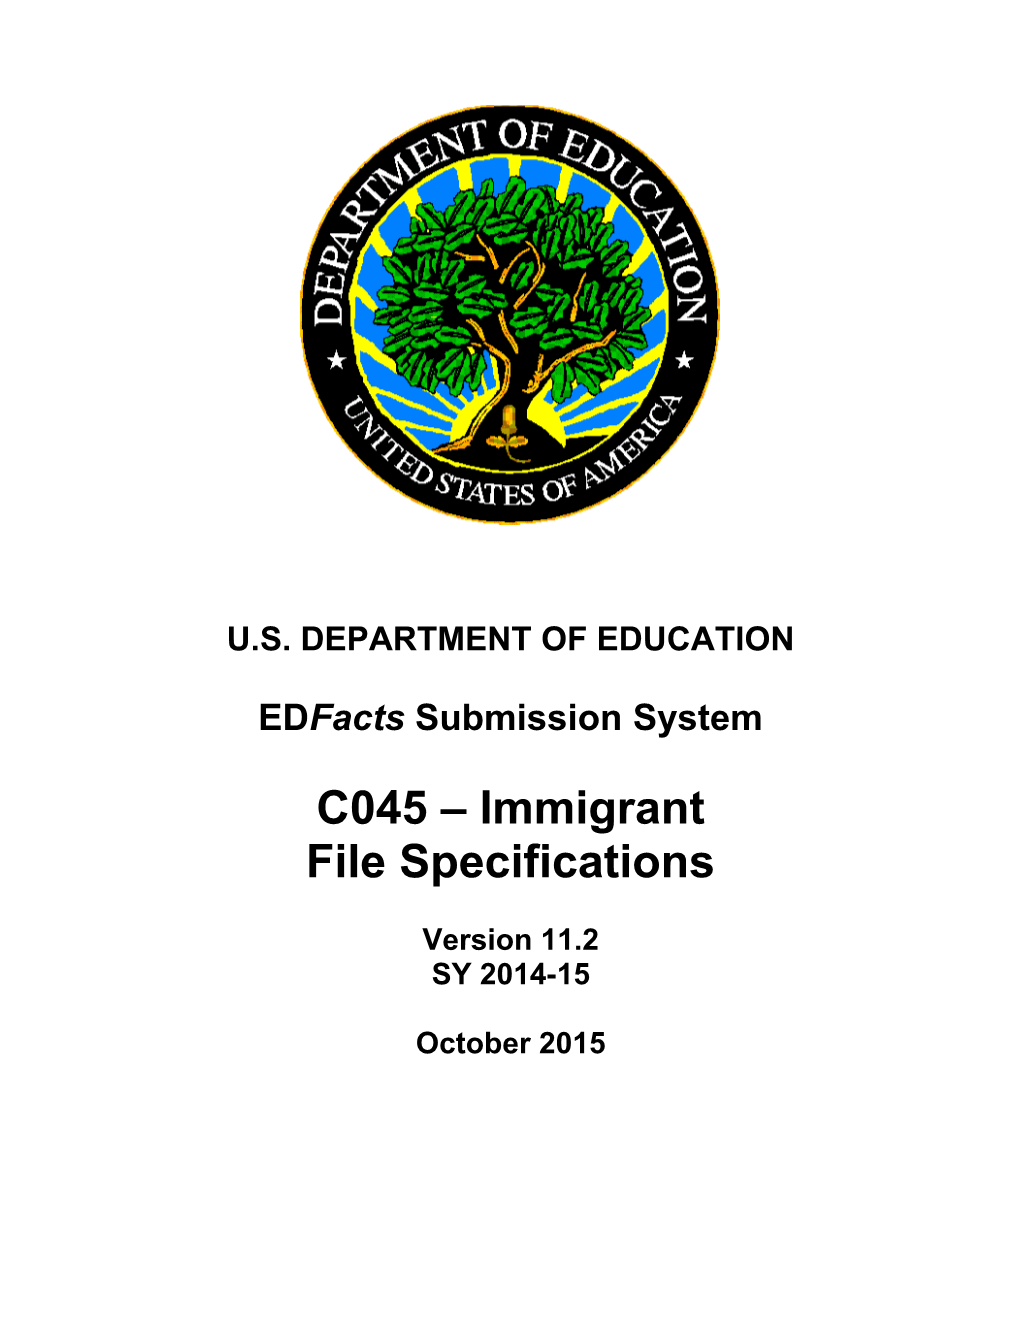 Immigrant File Specifications